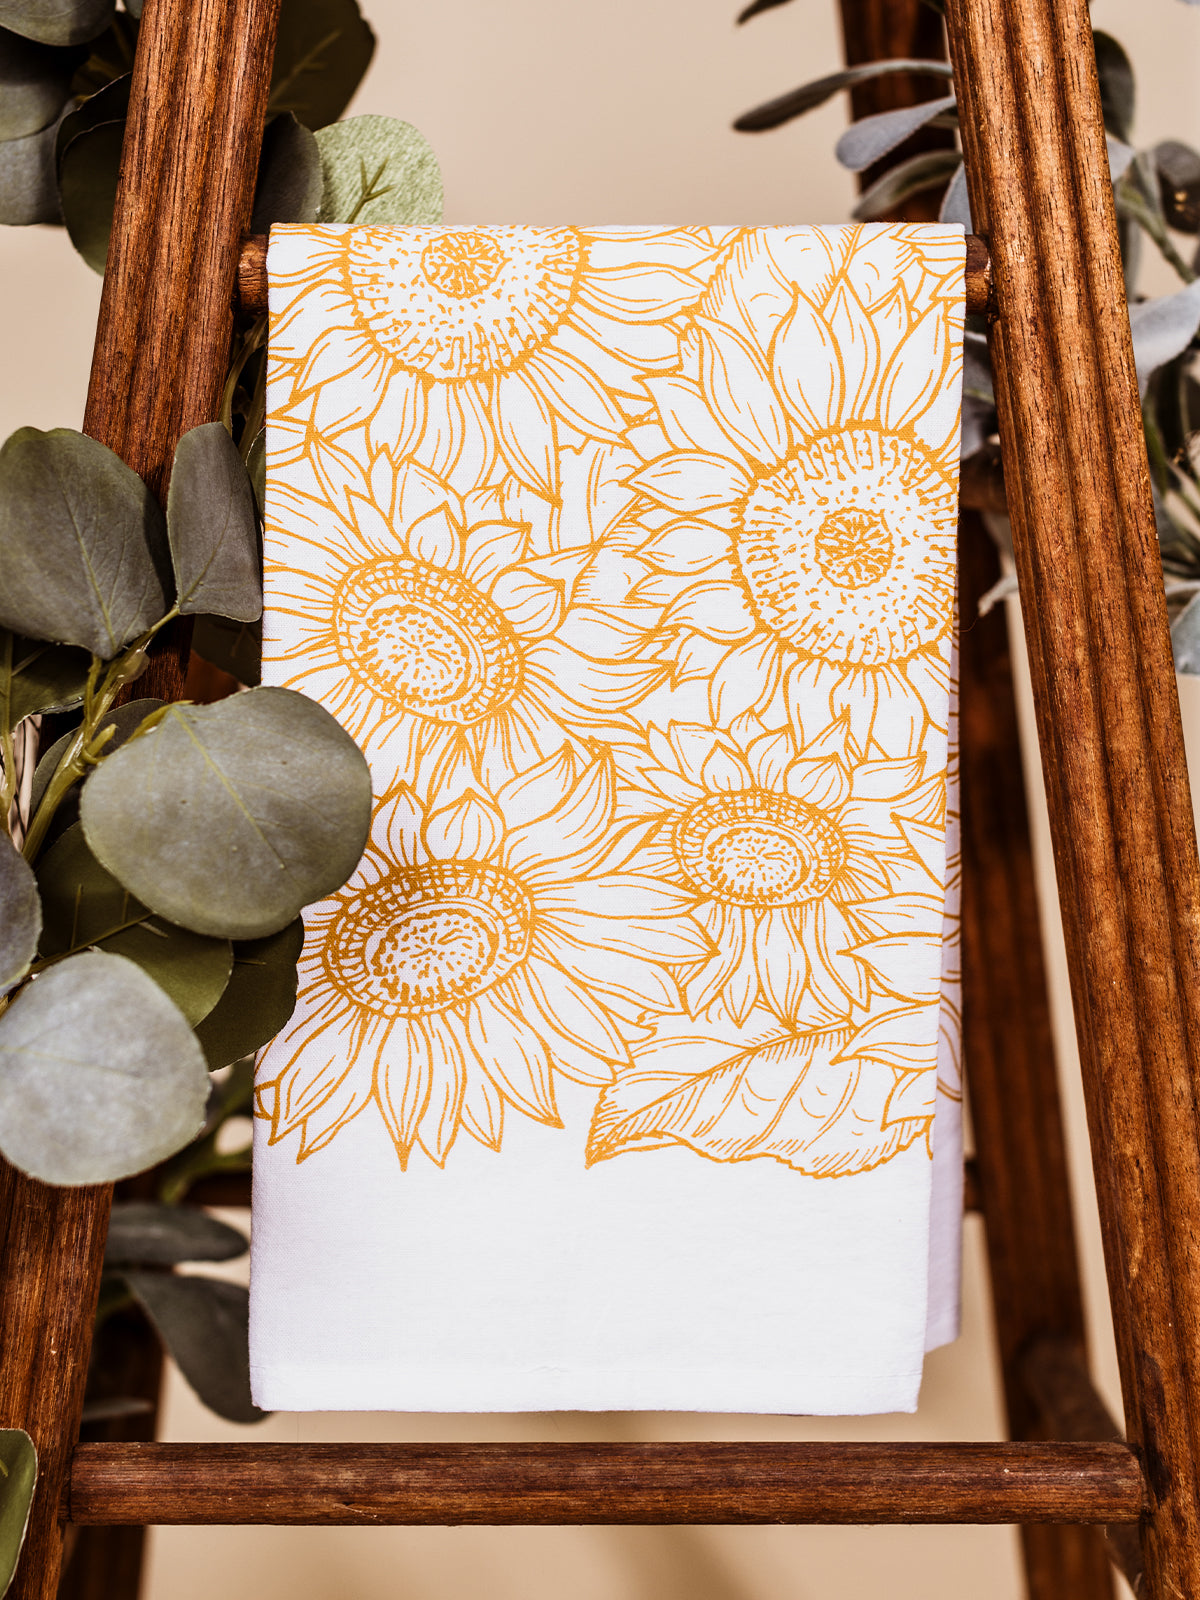 Sunflower tea towel dropped on a wooden stool with greenery.